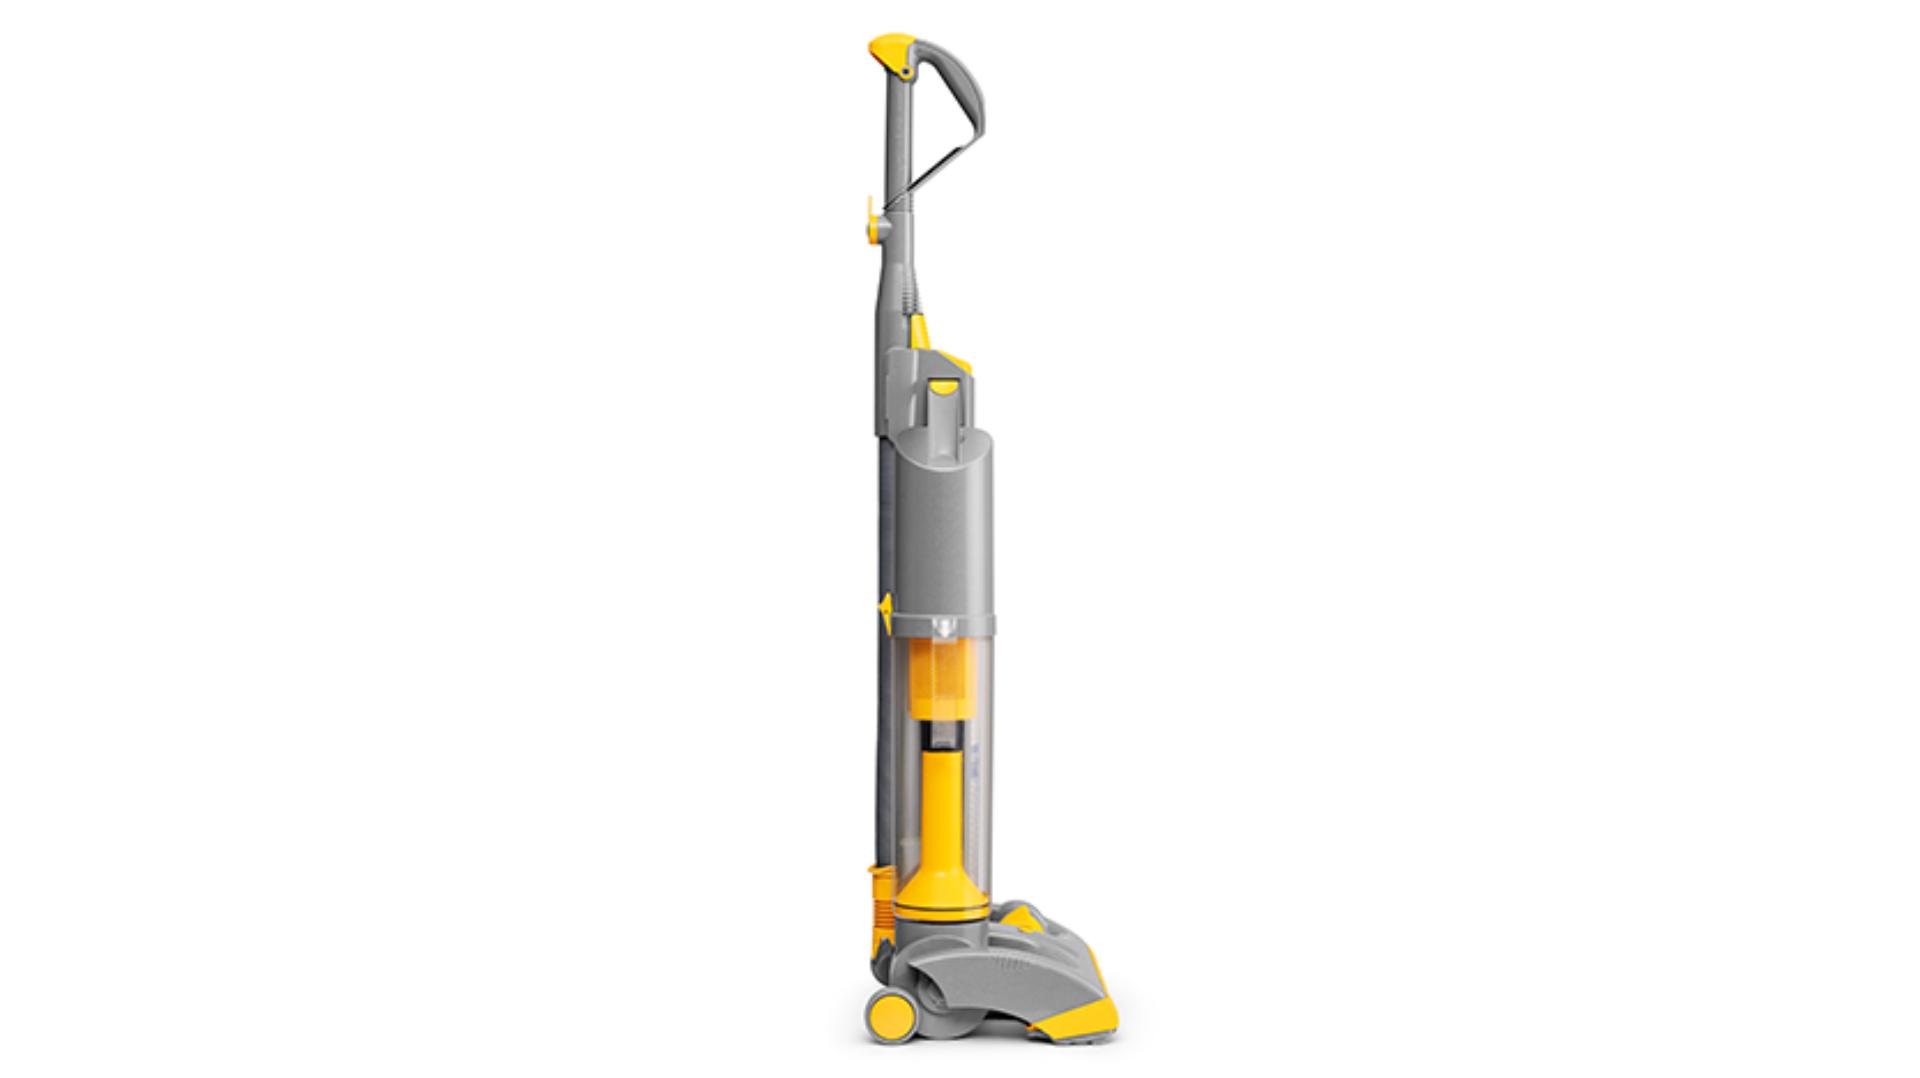 Side view of DC03 upright vacuum